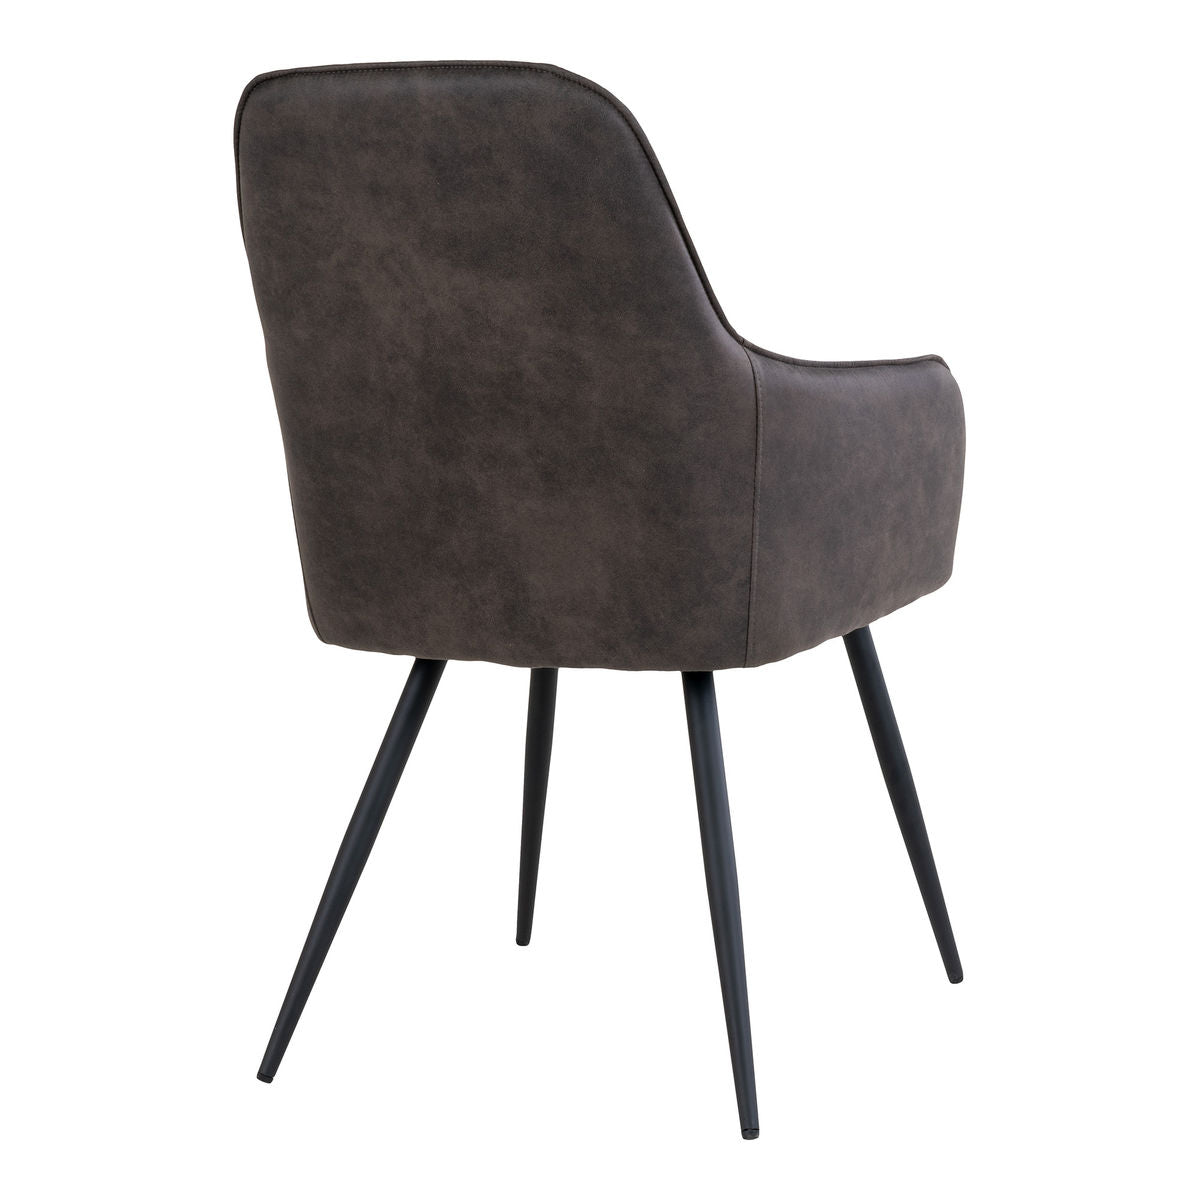 House Nordic - Harbo Dining Table Chair